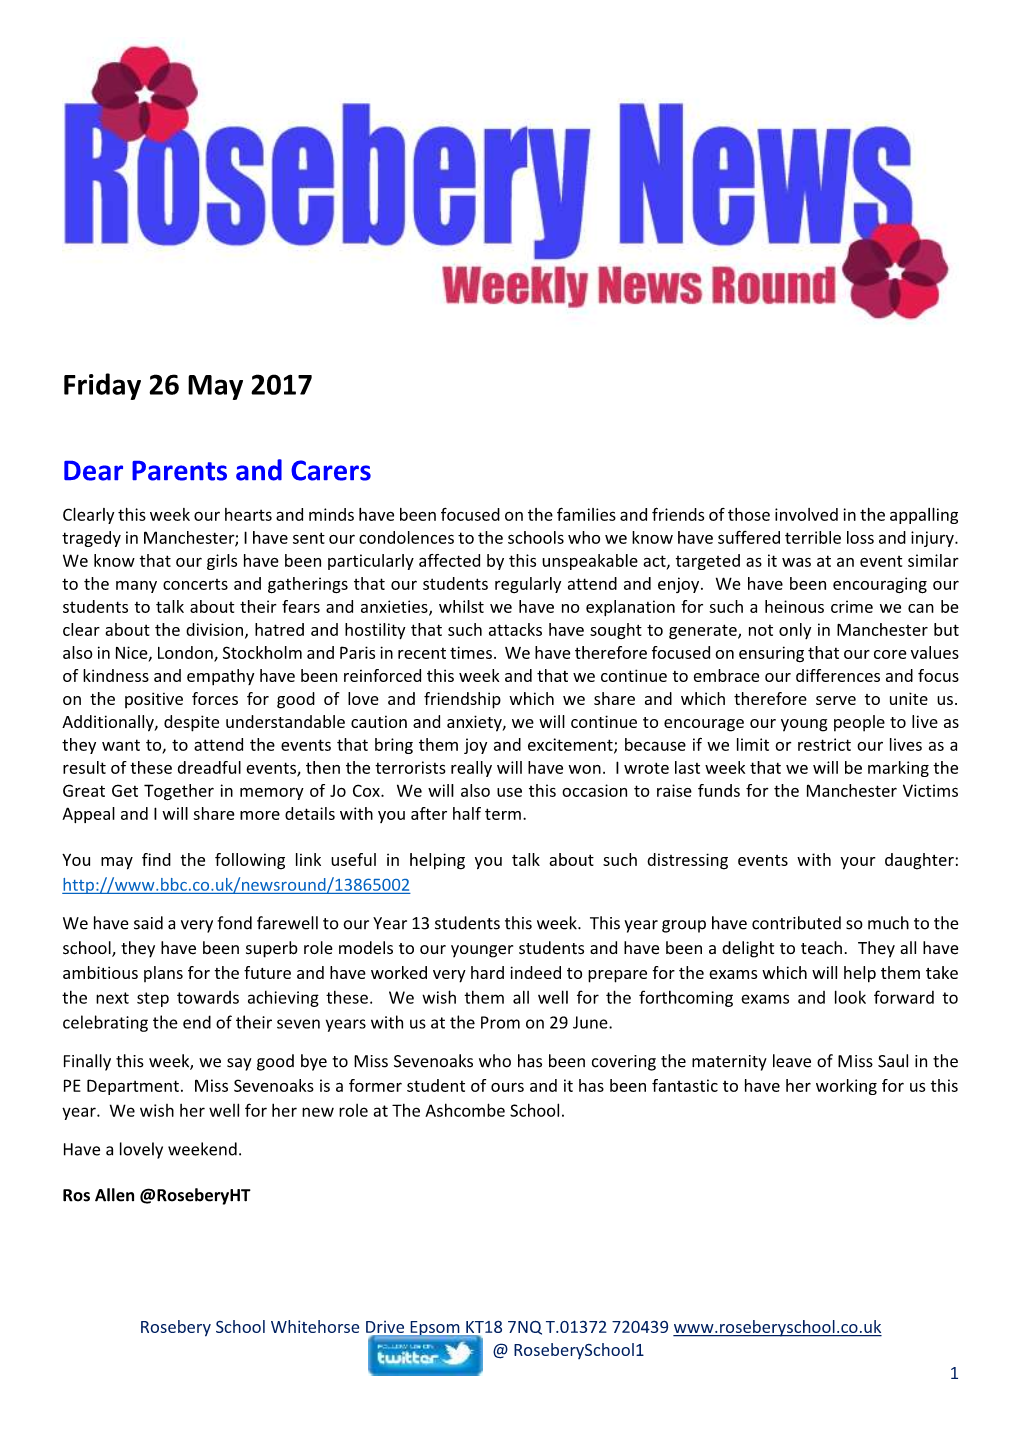 Friday 26 May 2017 Dear Parents and Carers